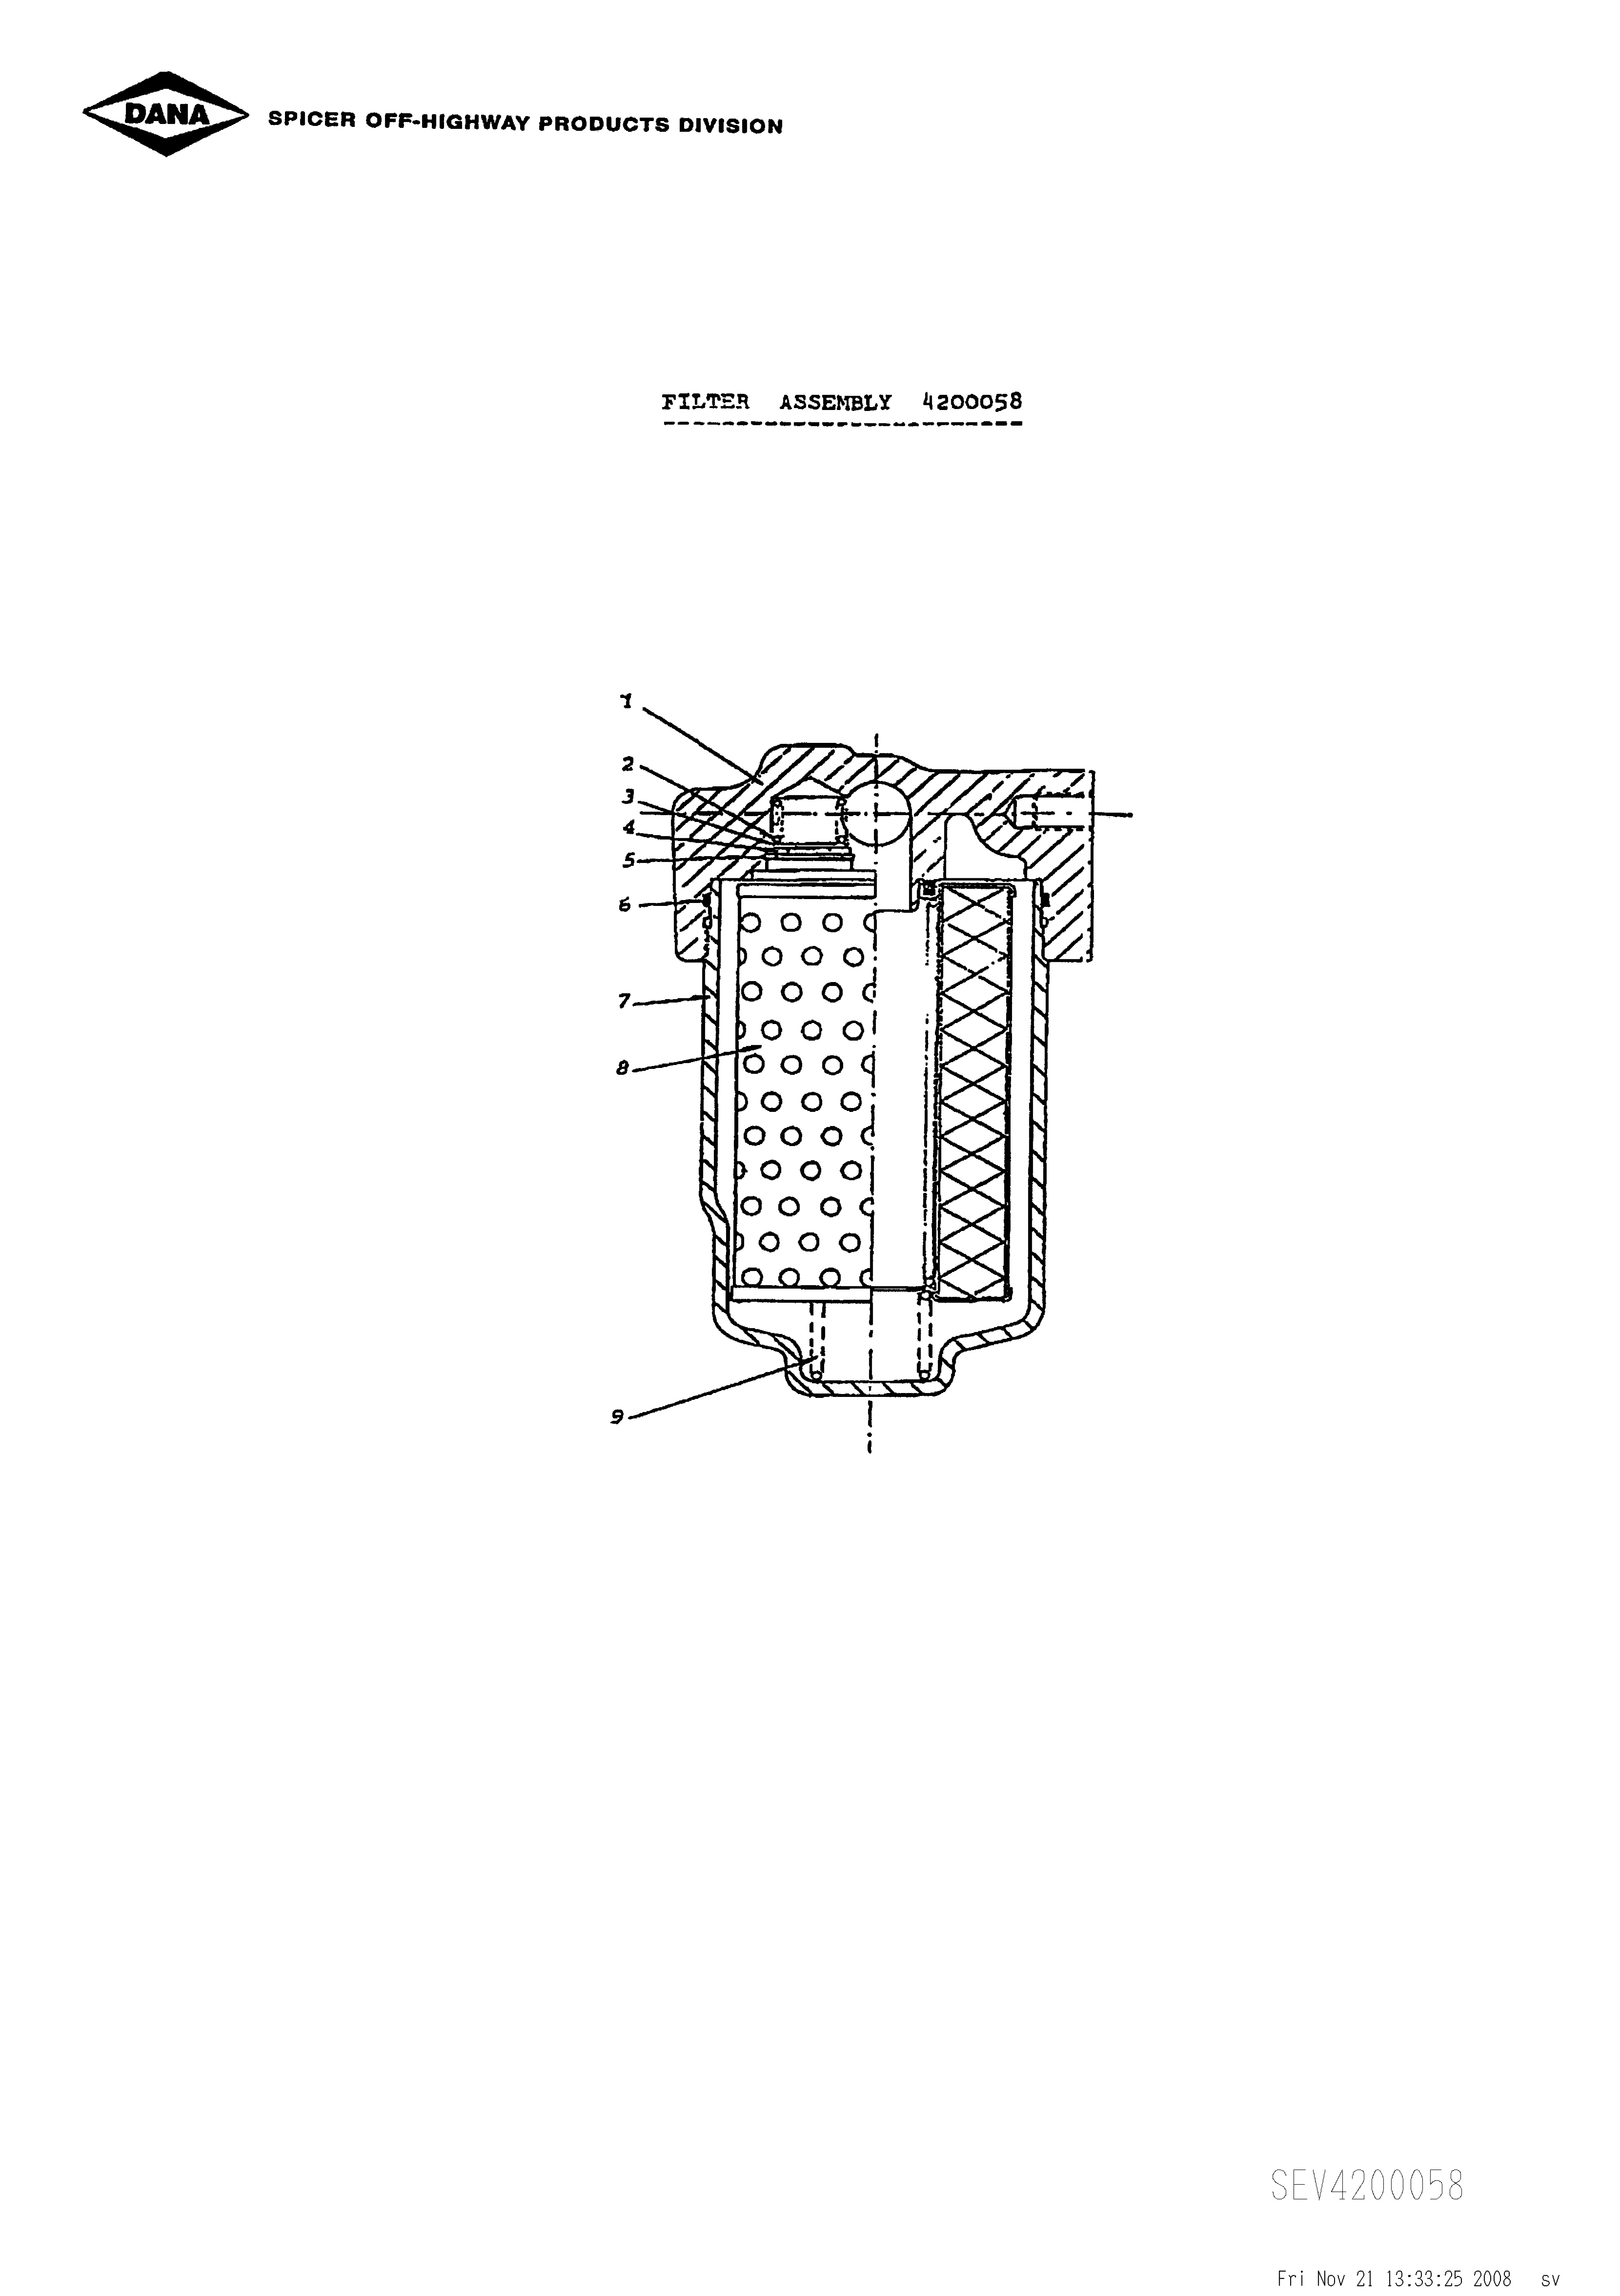 drawing for MILLER TECHNOLOGY 003651-001 - DISC (figure 1)